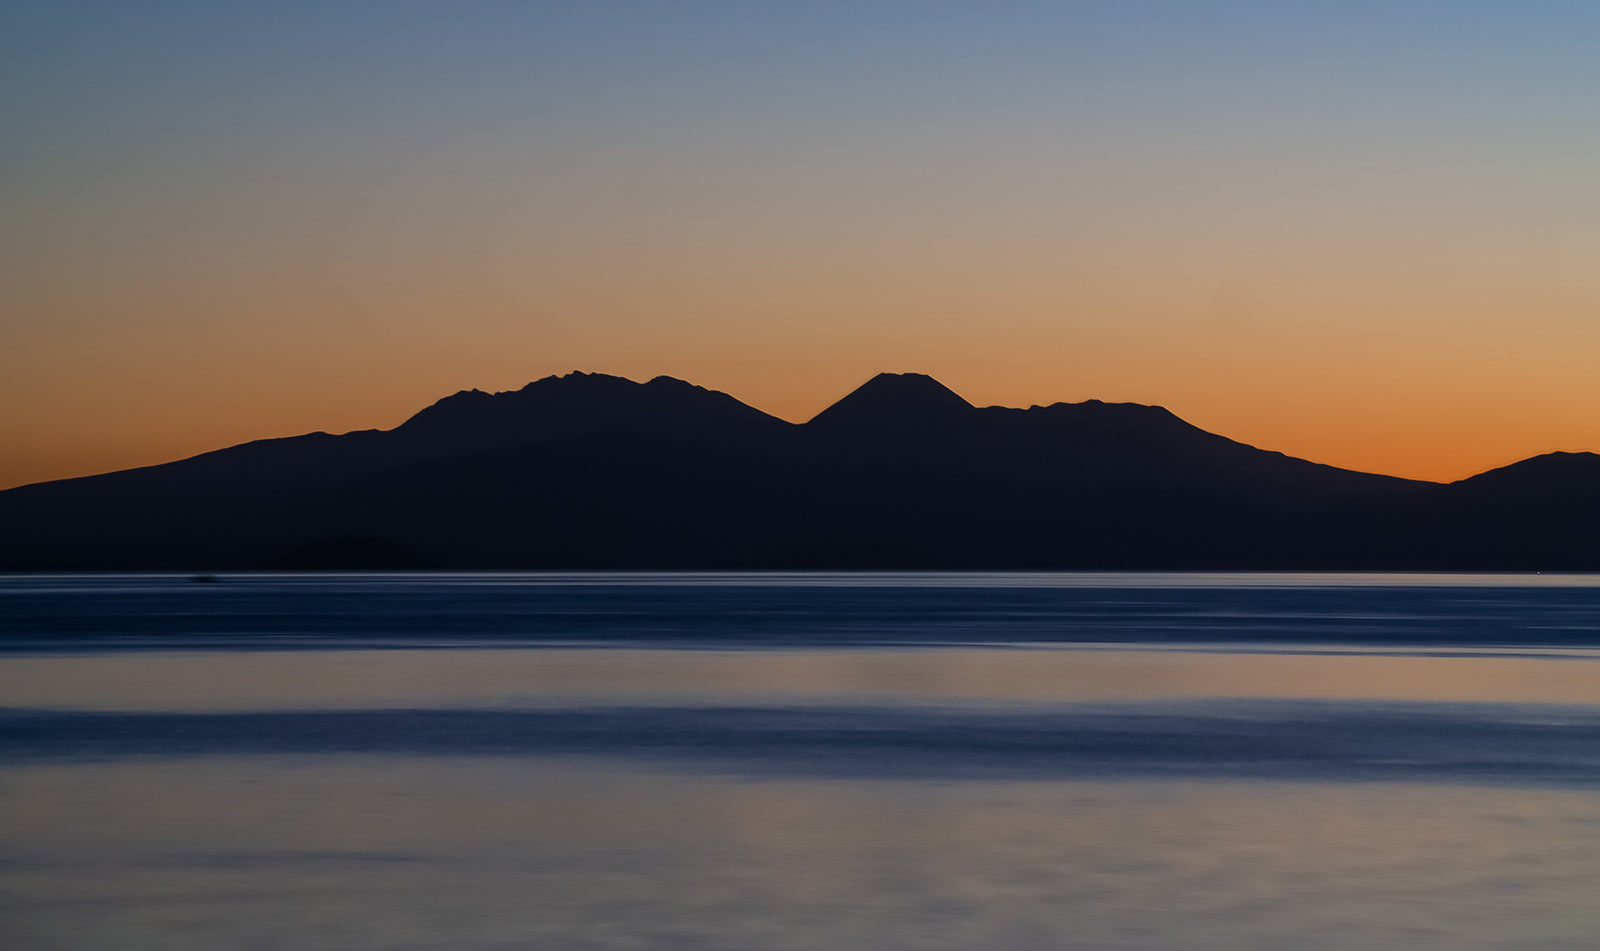 Clear skies and perfect sunset over Lake Taupo.